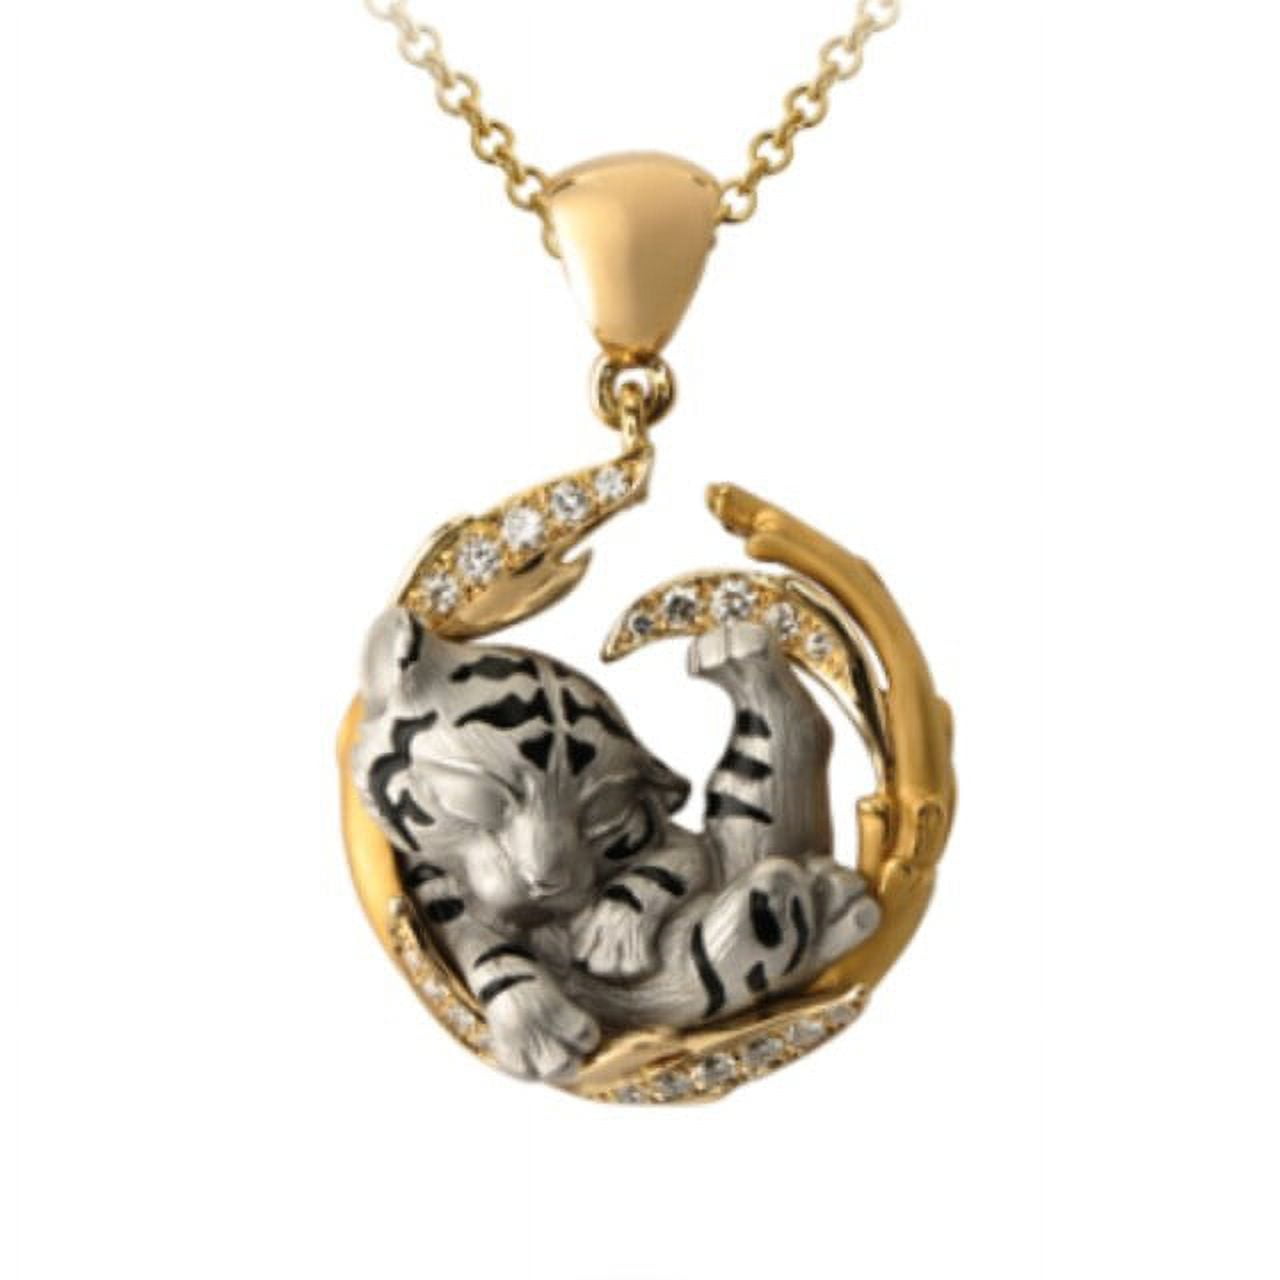 Shop Zircon Stone Necklace and Earrings Set in the Form of a Tiger